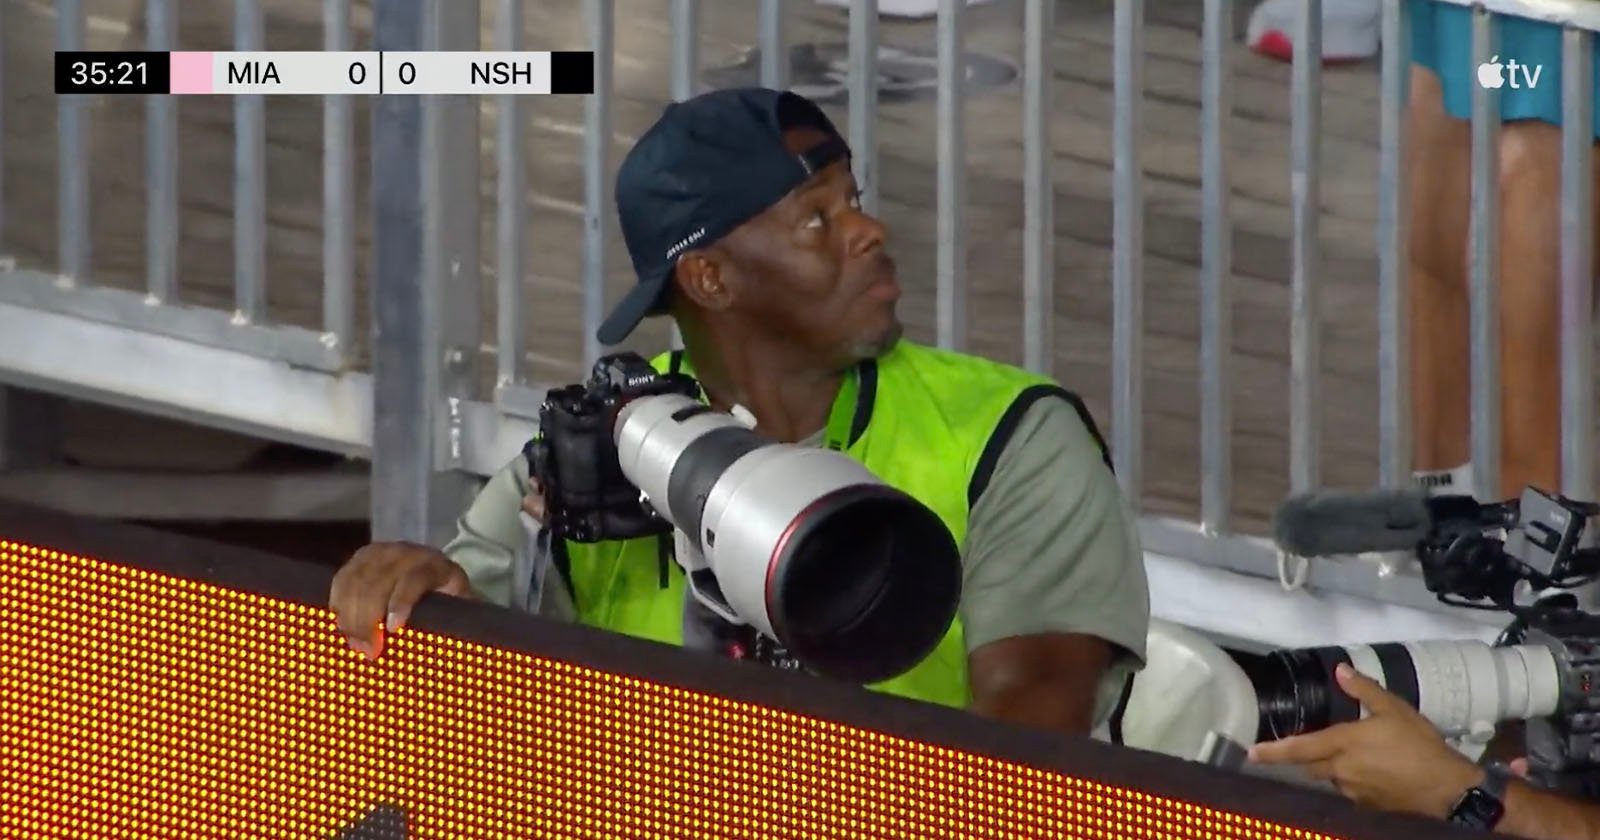 Ken Griffey Jr. Spotted at Soccer Game Photographing Leo Messi